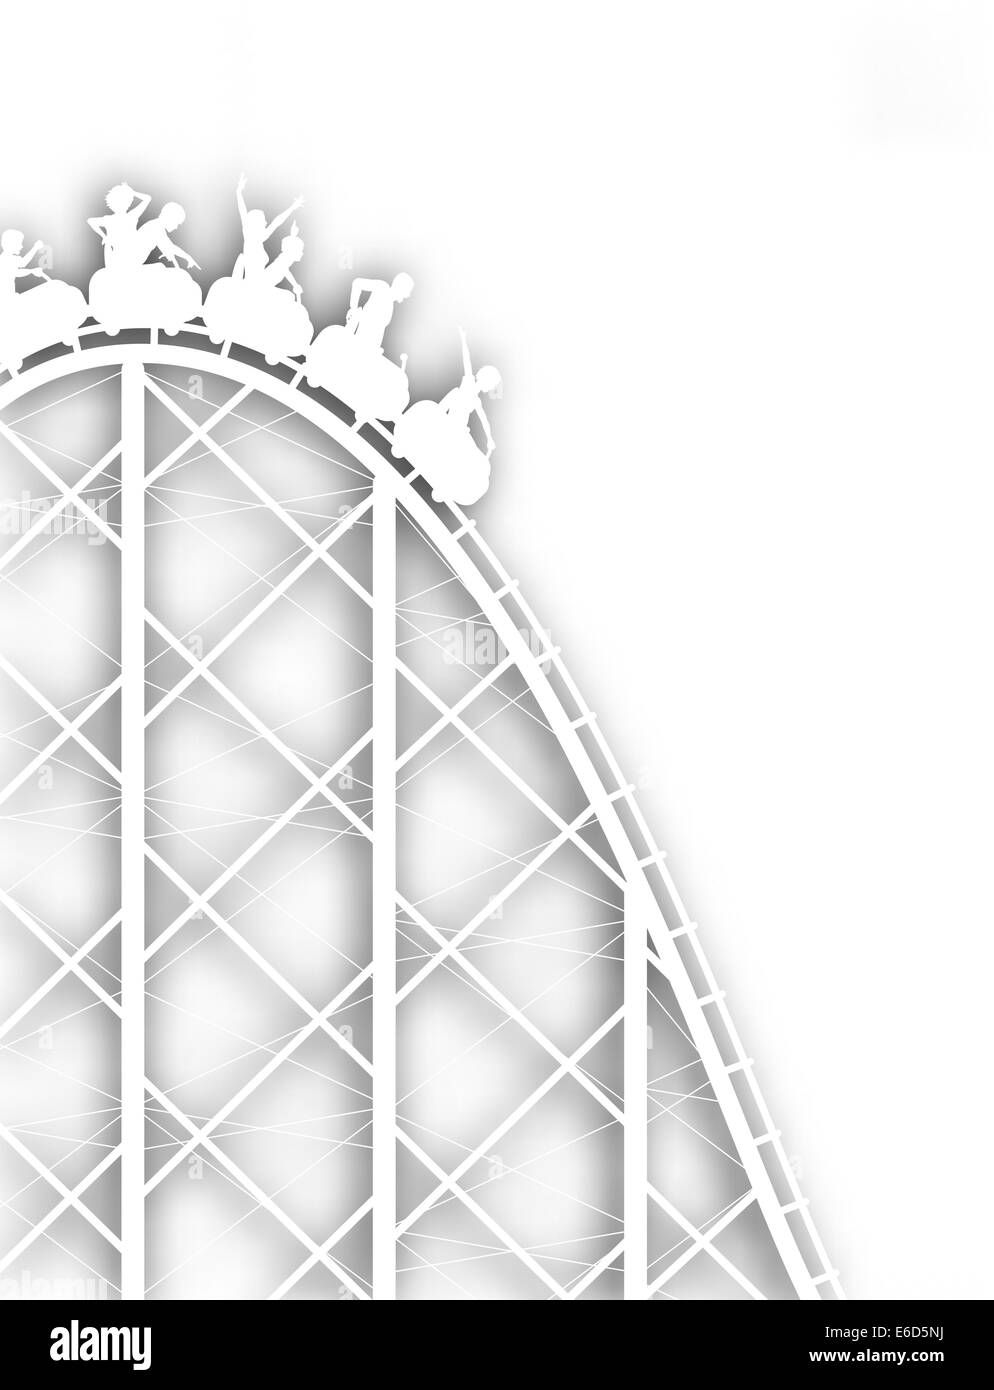 Editable vector cutout silhouette of a steep rollercoaster ride with background shadow made using a gradient mesh Stock Vector